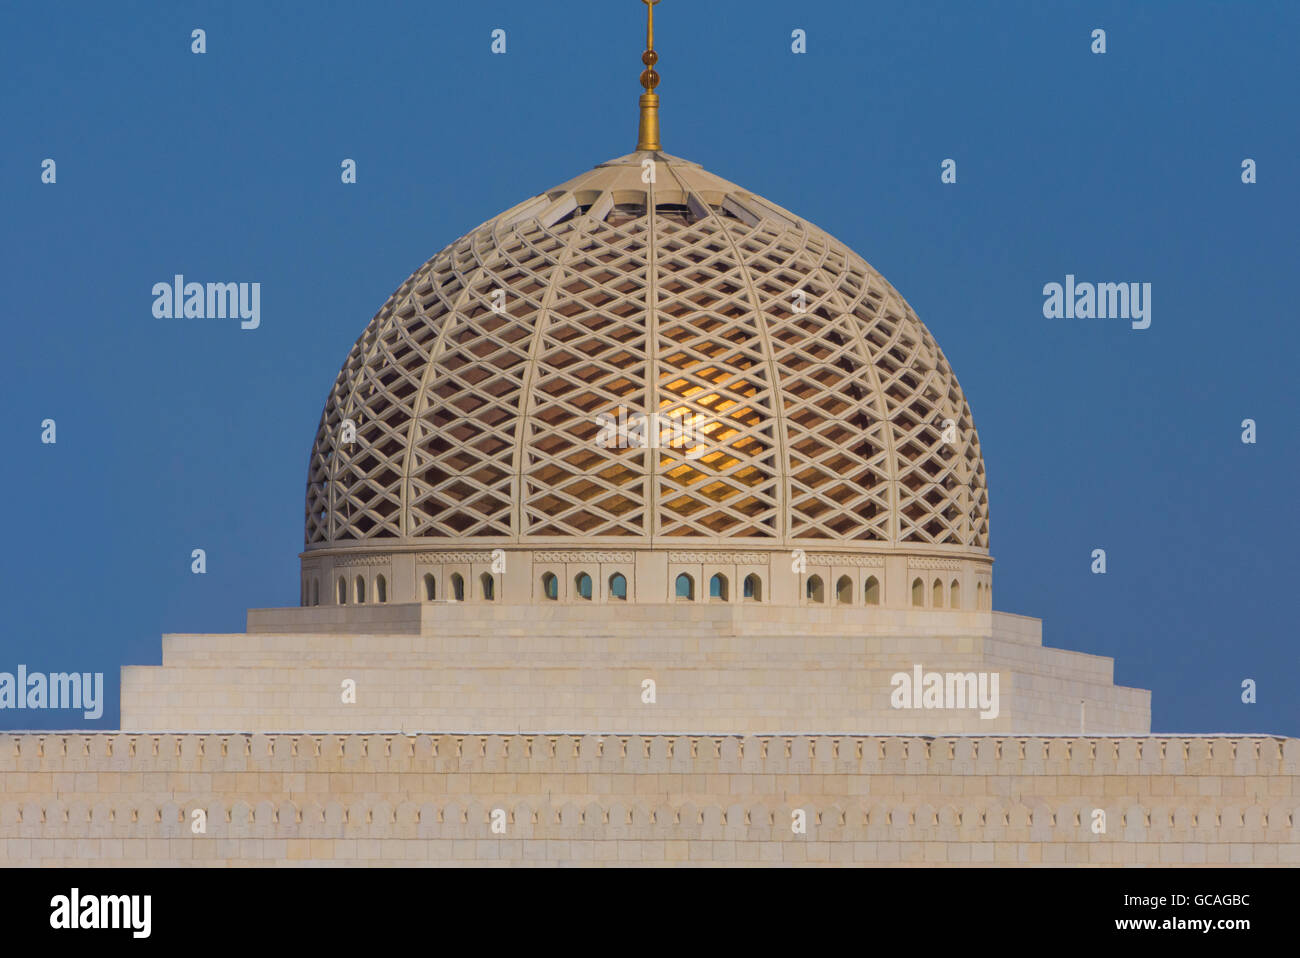 The main dome of the Sultan Qaboos Grand Mosque, Muscat, Sultanate of Oman Stock Photo